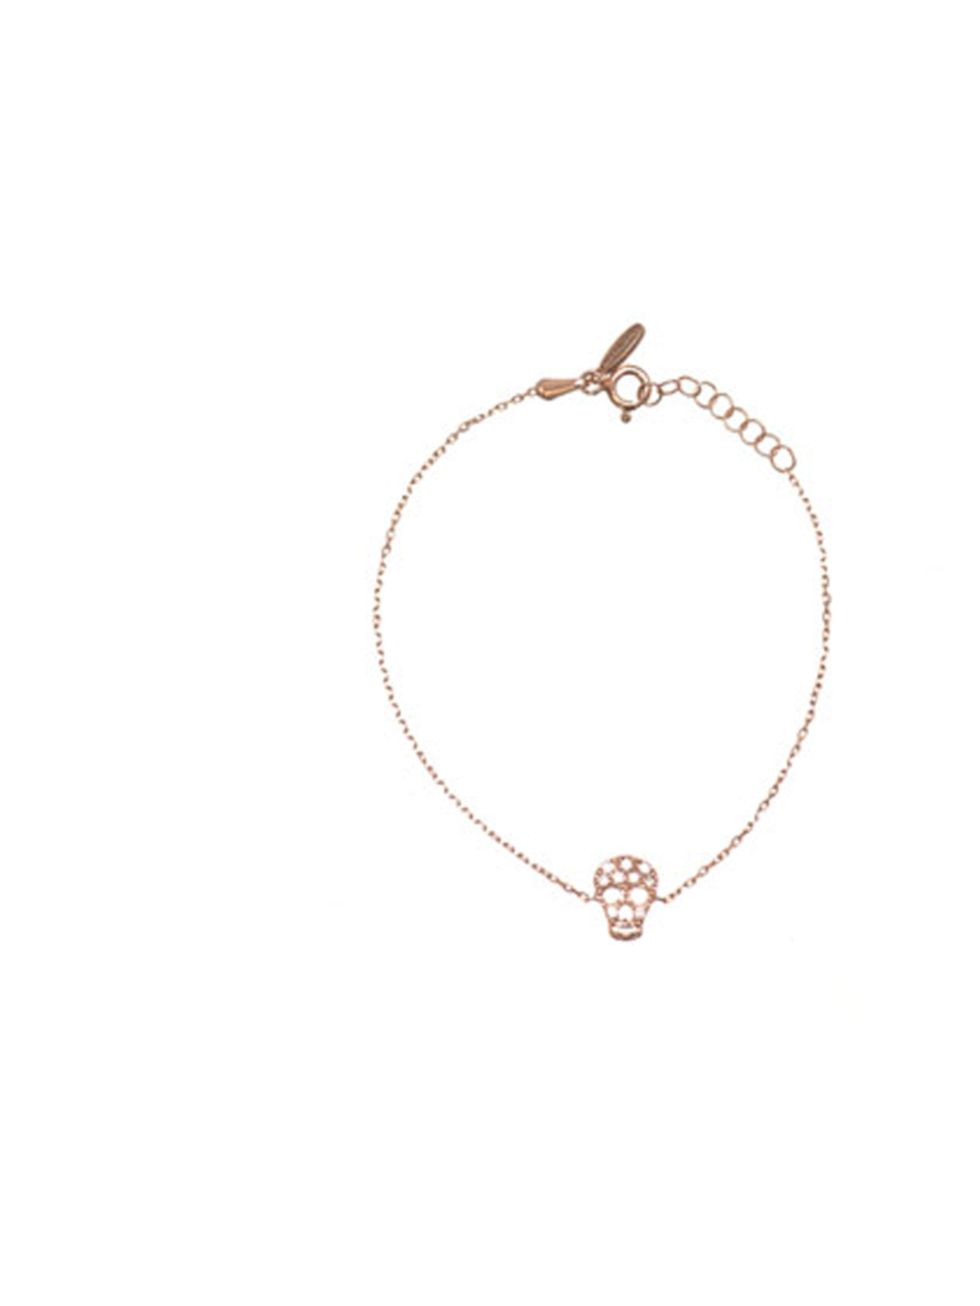 <p>Pretty yet subversive, this delicate charm bracelet will add a directional feel to your everyday look Aamaya by Priyanka skull charm braceet, £110, at Matches</p><p><a href="http://shopping.elleuk.com/browse?fts=aamaya+skull+bracelet">BUY NOW</a></p>